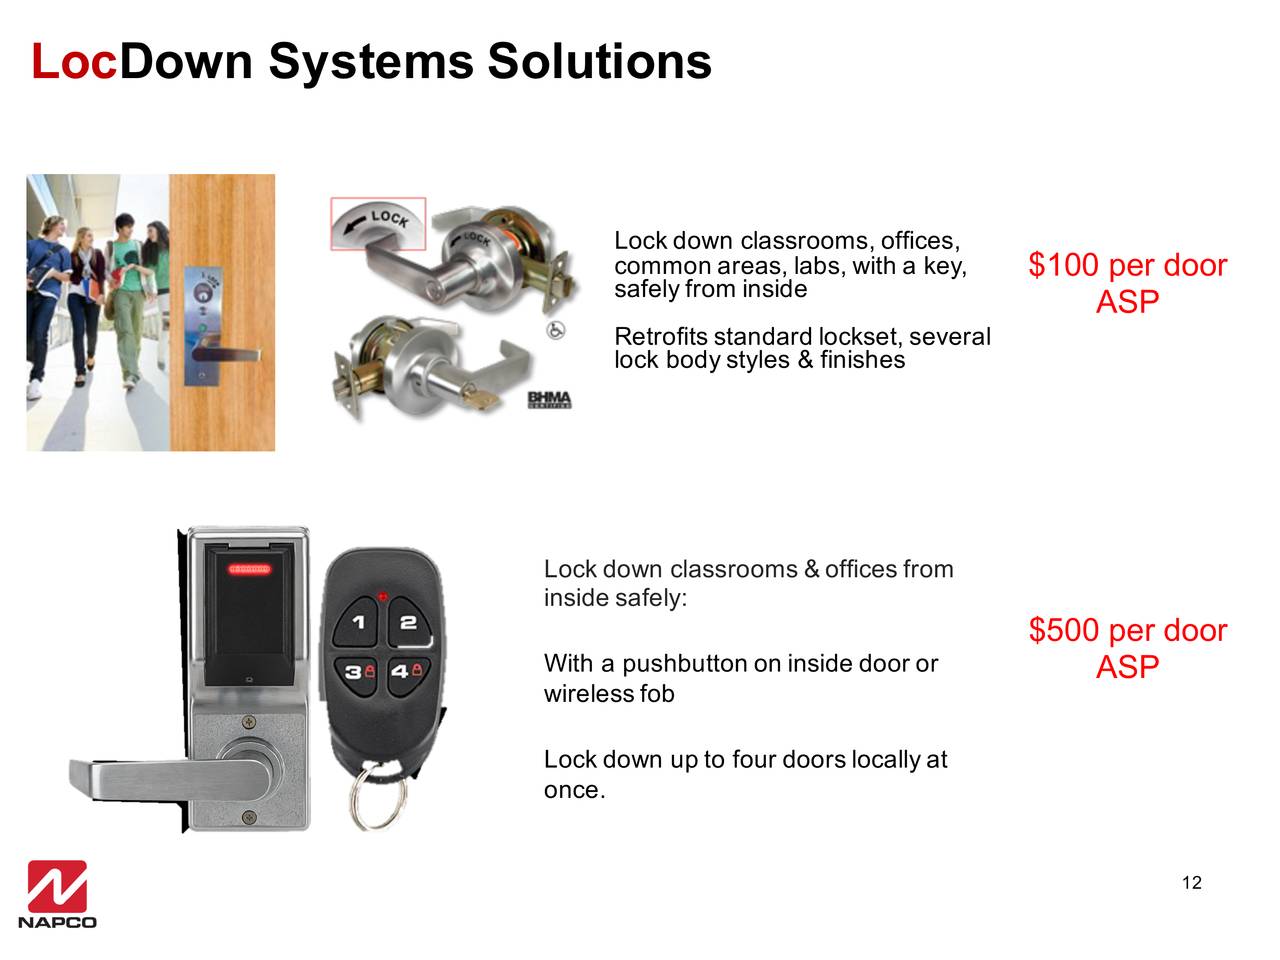 LocDown Systems Solutions